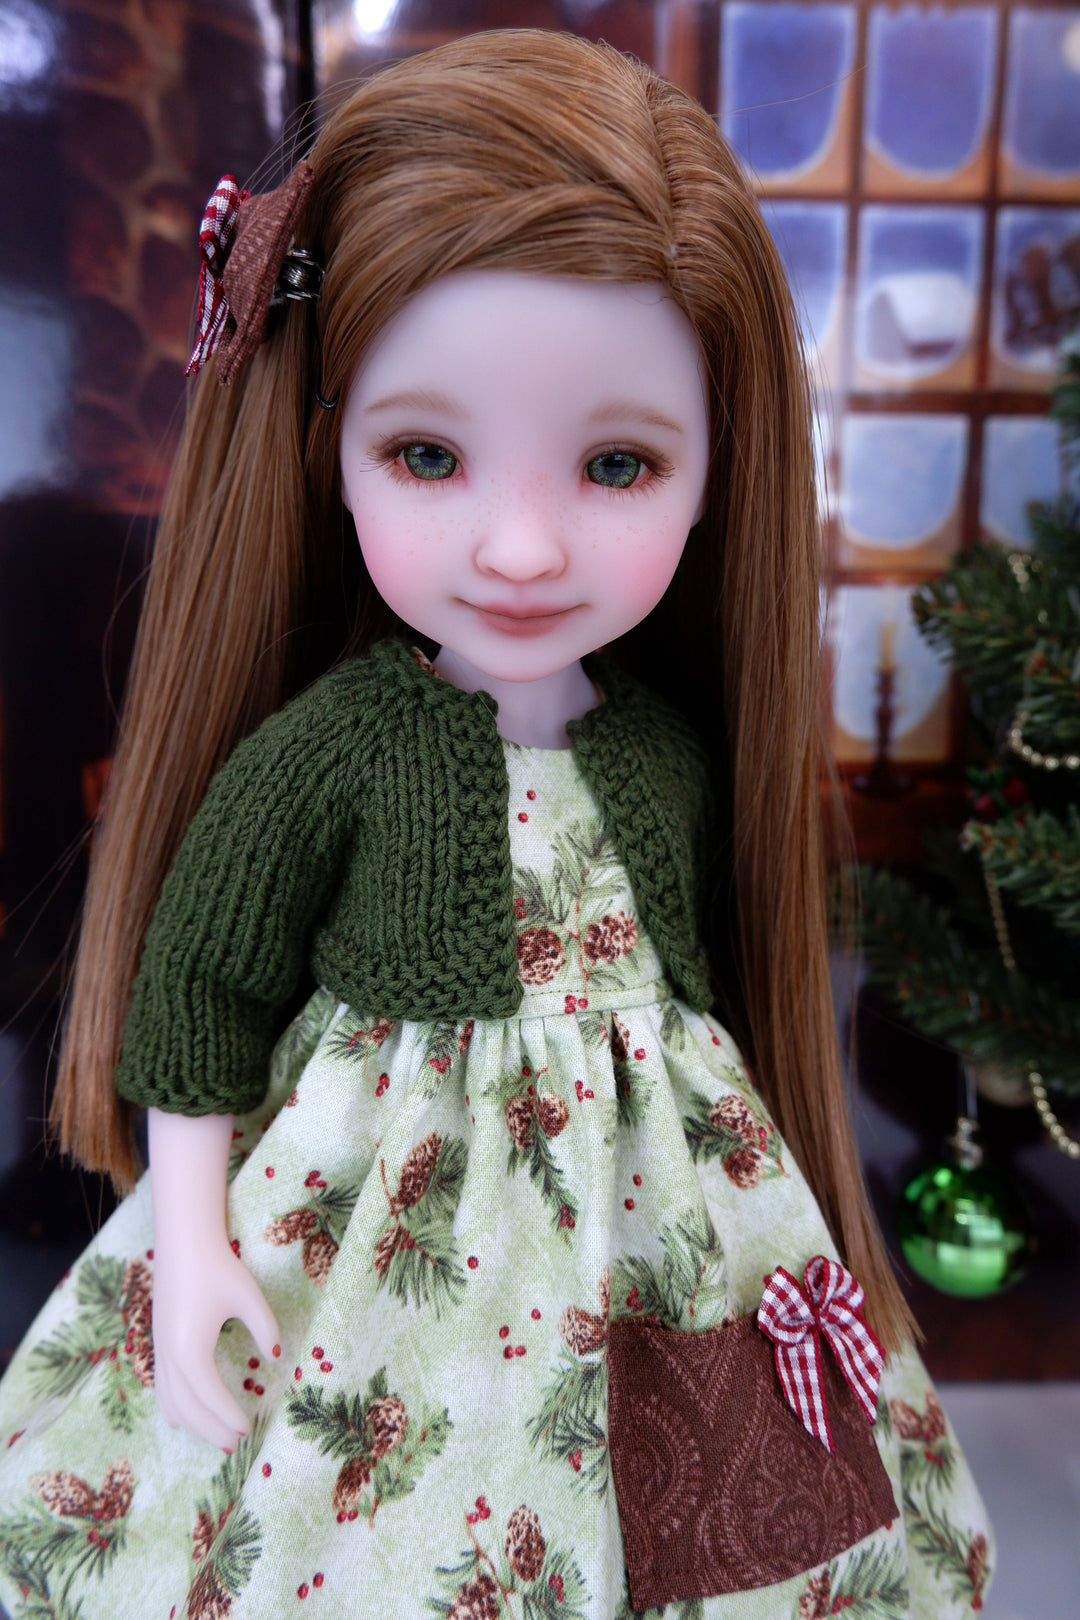 Pine Cone Noel - dress with sweater & boots for Ruby Red Fashion Friends doll